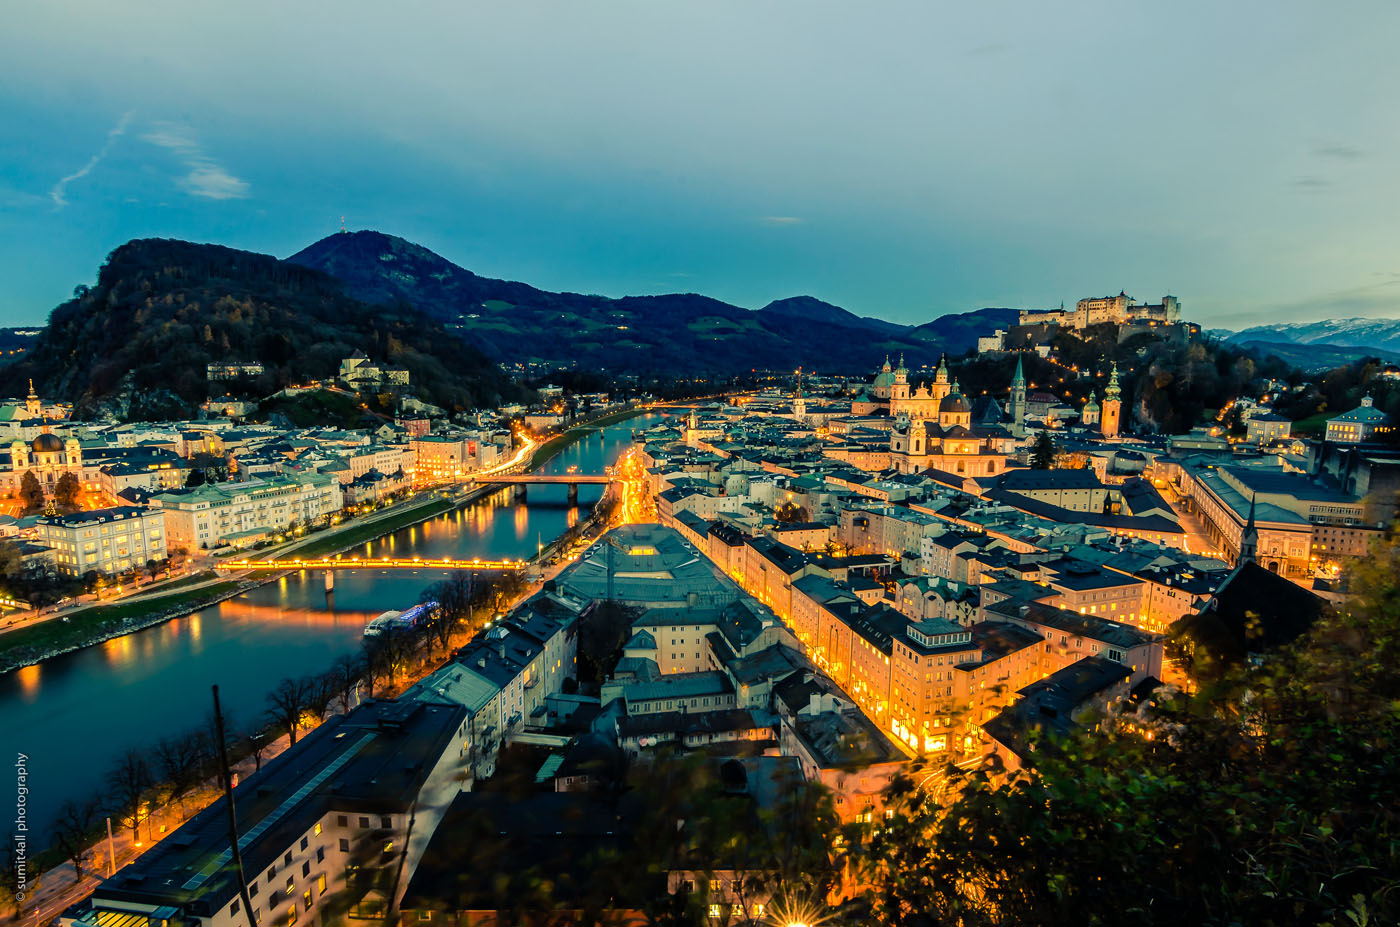 The city of Salzburg after sunset in Austria.